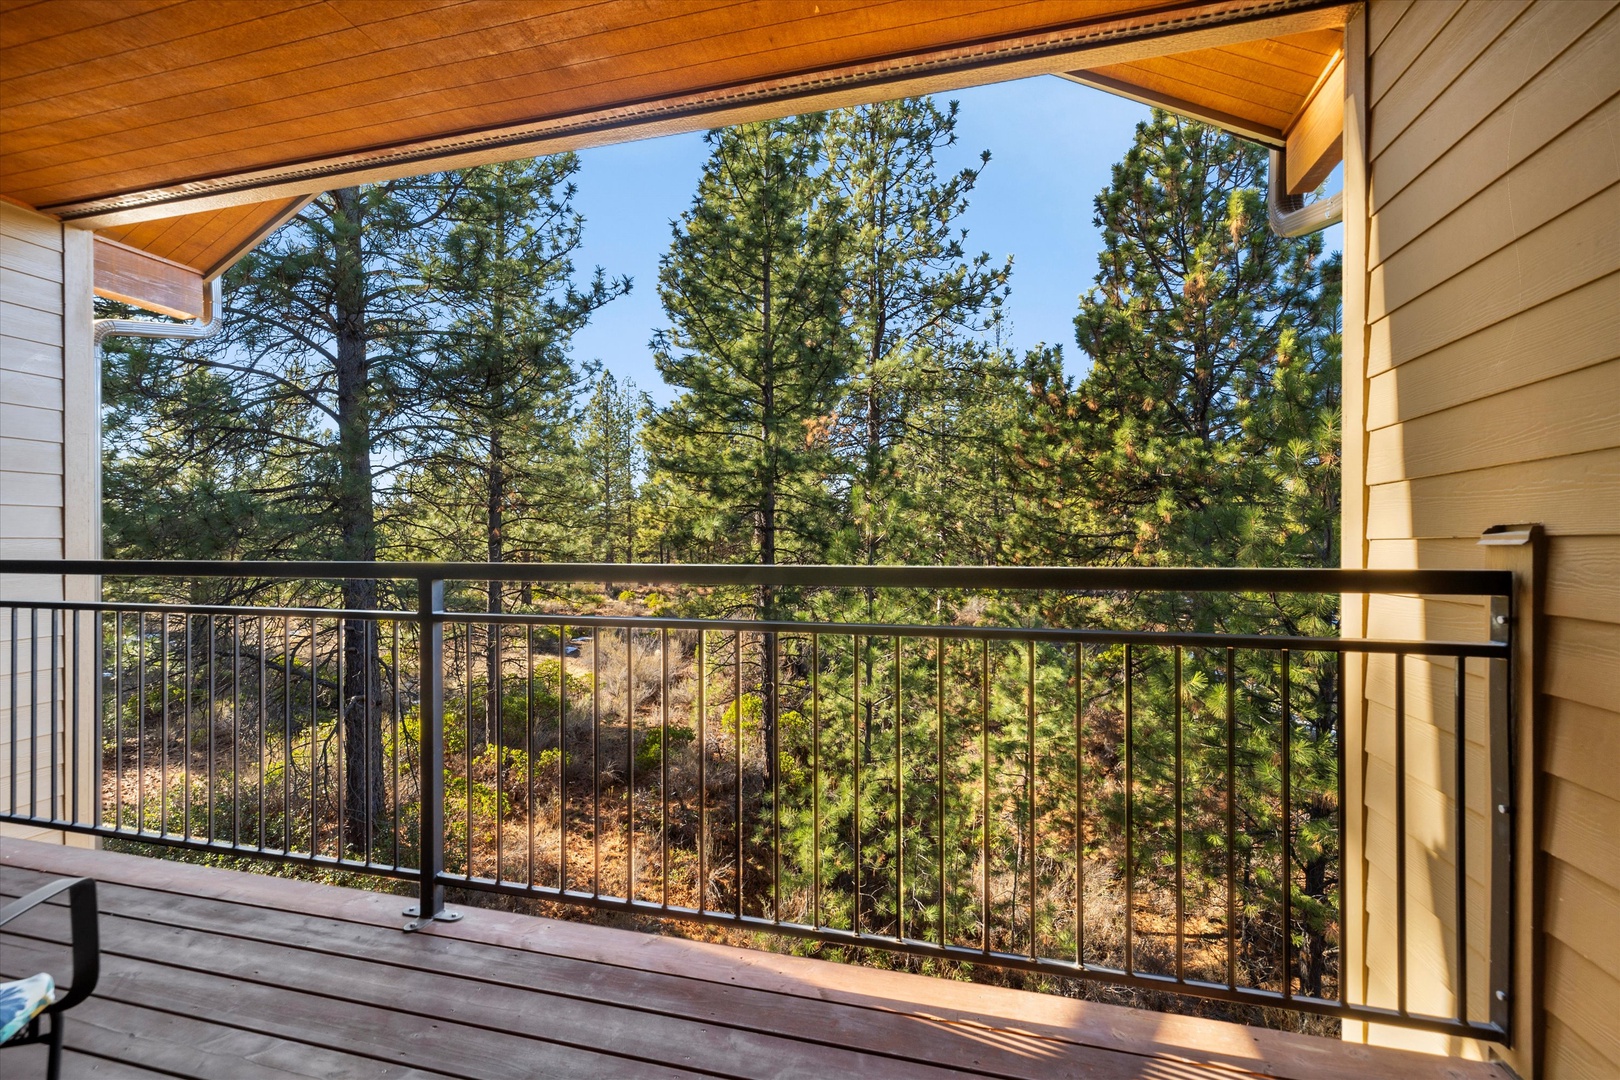 Step out onto the balcony and take in the fresh air with gorgeous views